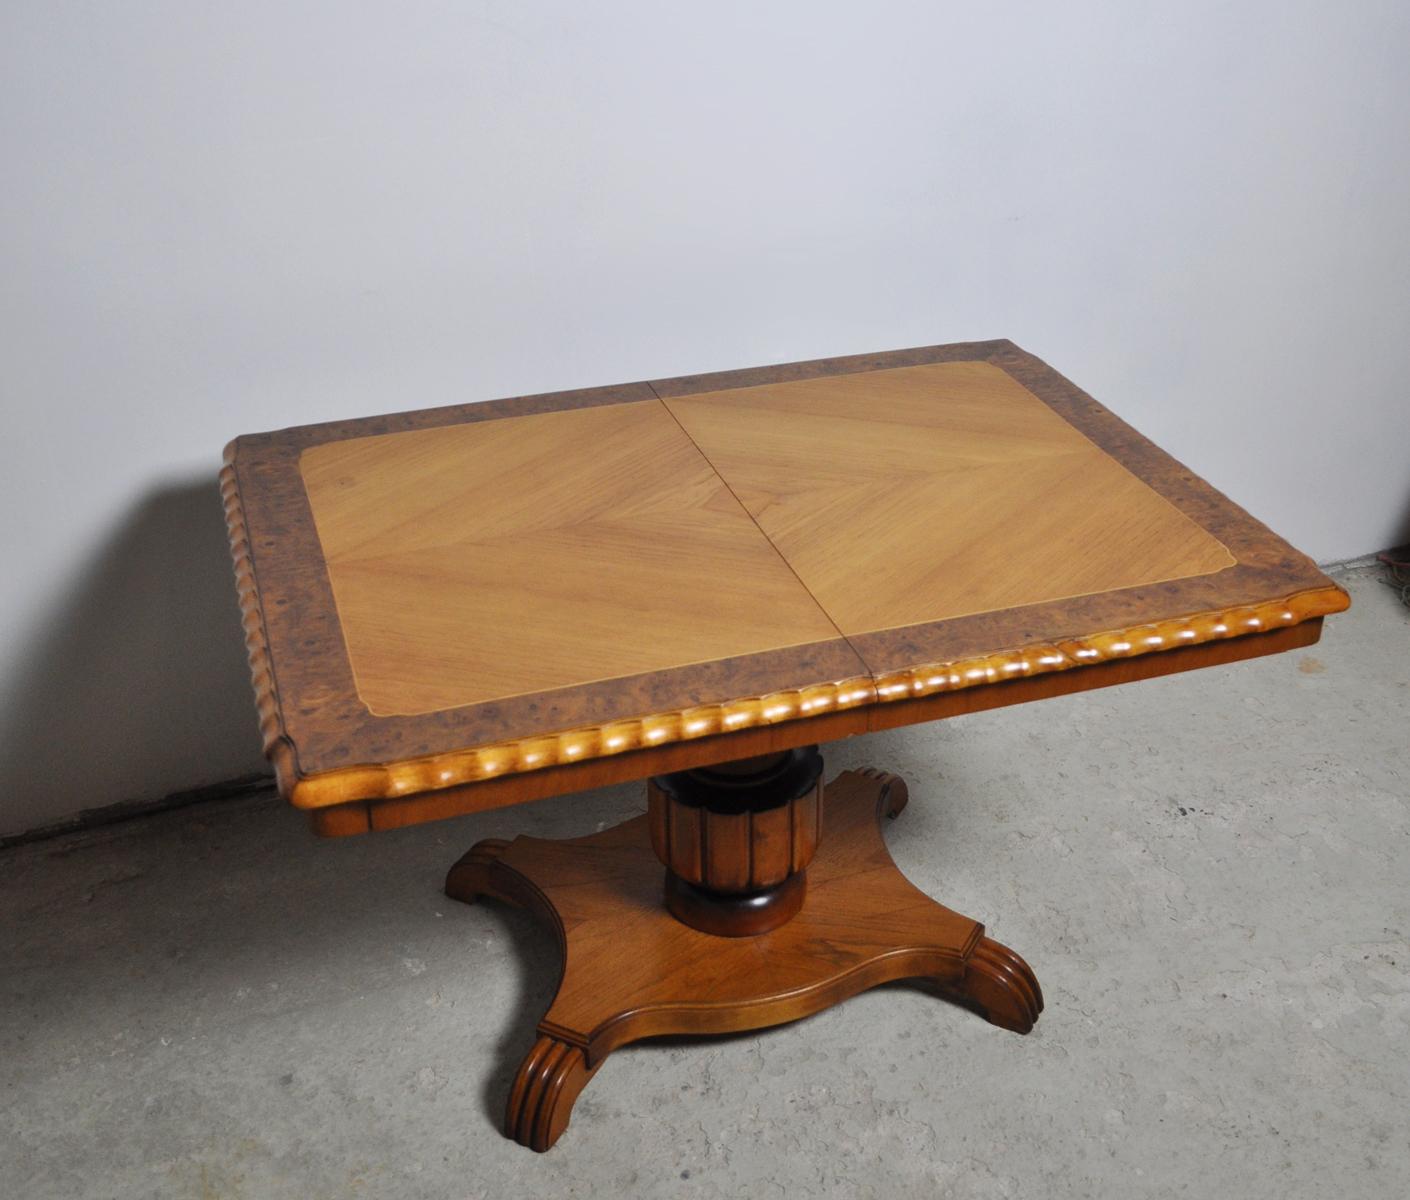 Swedish Art Deco rectangular golden elm end or side table with a detailed pedestal base. Beautifully detailed border on the top and carved edge detail. 
The height is adjustable from 60,5 cm easily swivels up to 73,5 cm high. Originally, it had an